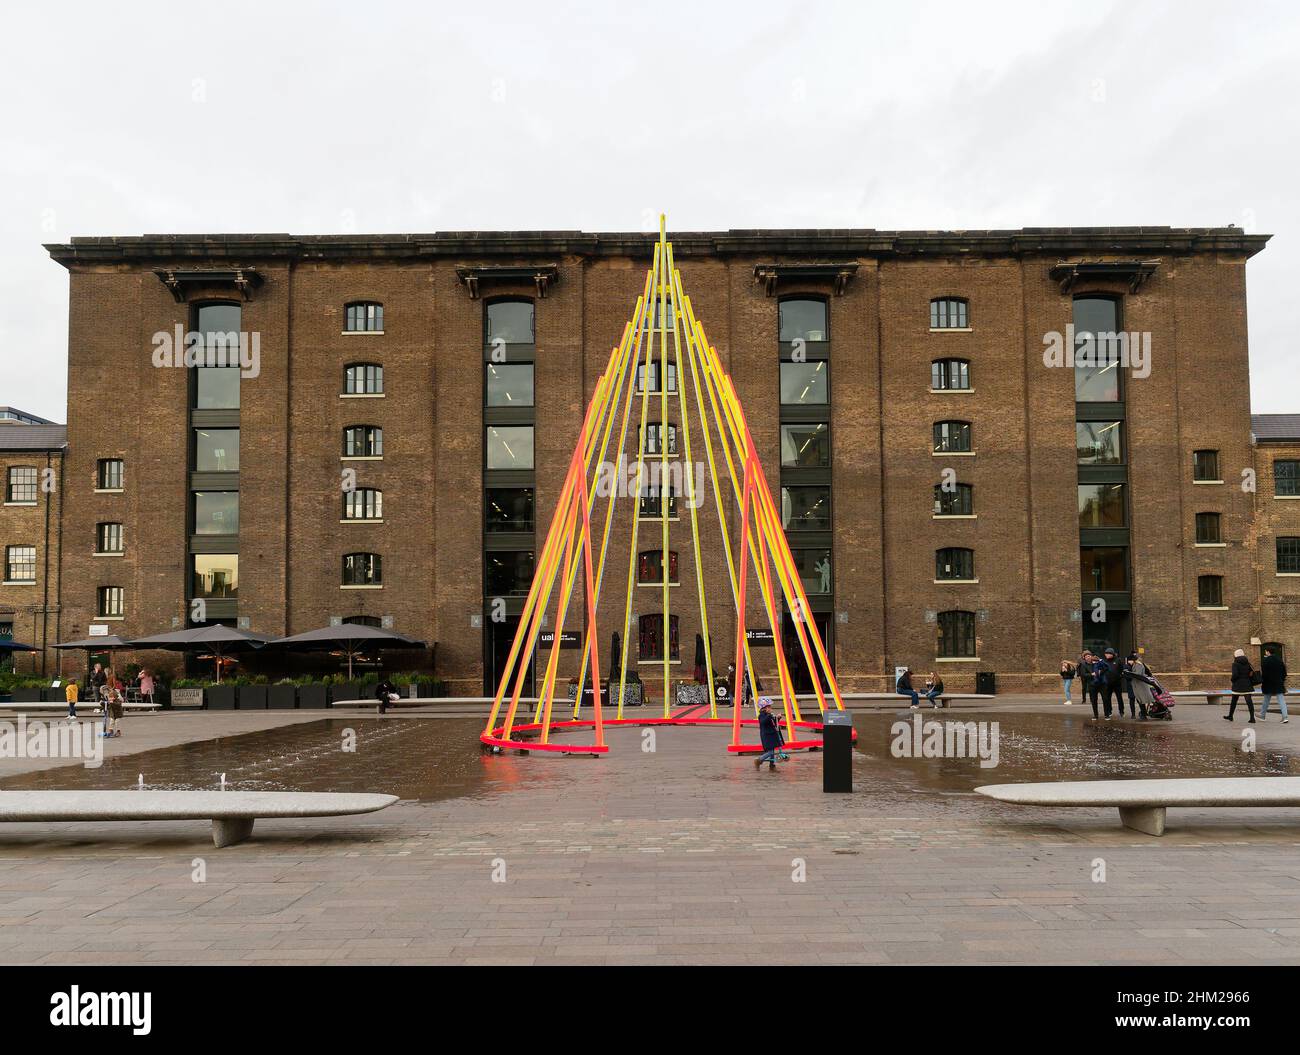 Central saint martins college hi-res stock photography and images - Alamy